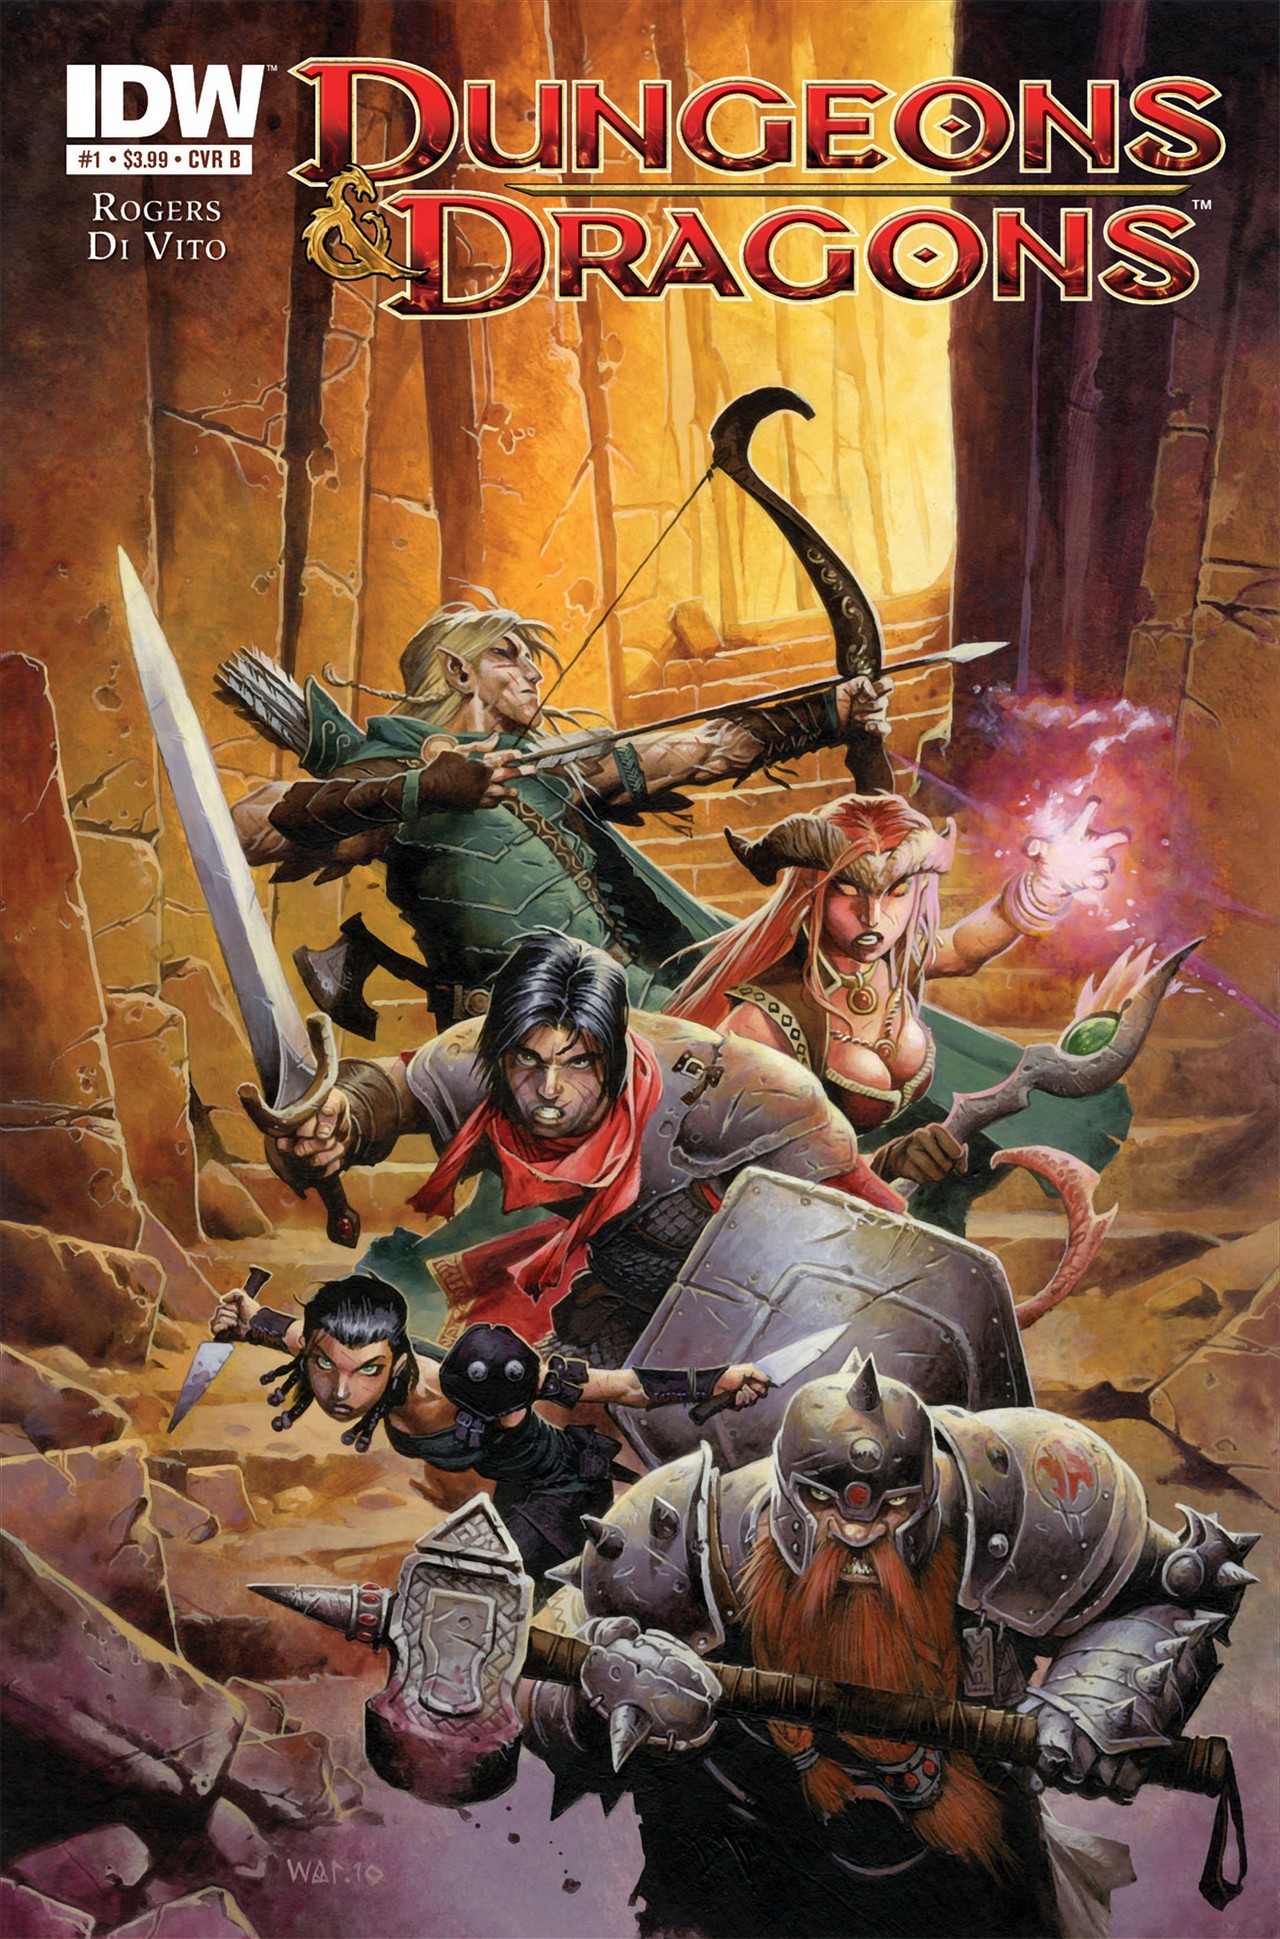 Dungeons & Dragons v1 #01 | Read All Comics Online For Free